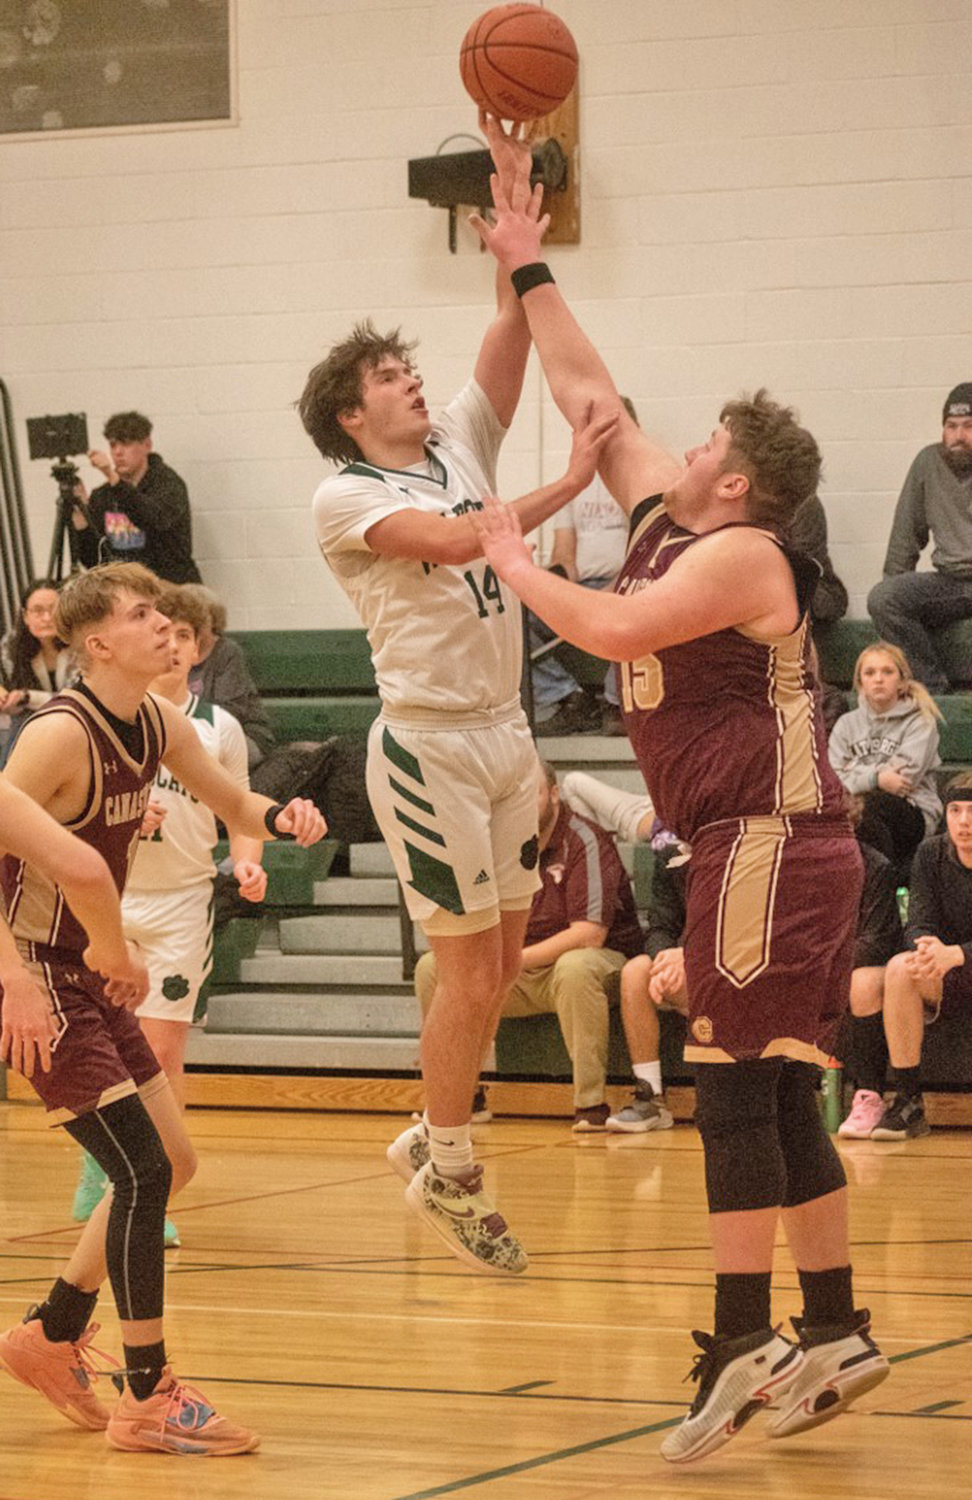 Maxim Weiler of Adirondack is challenged by Canastota's Caiden Bonneau in a game at home Friday. The Raiders won 51-38 on the road.